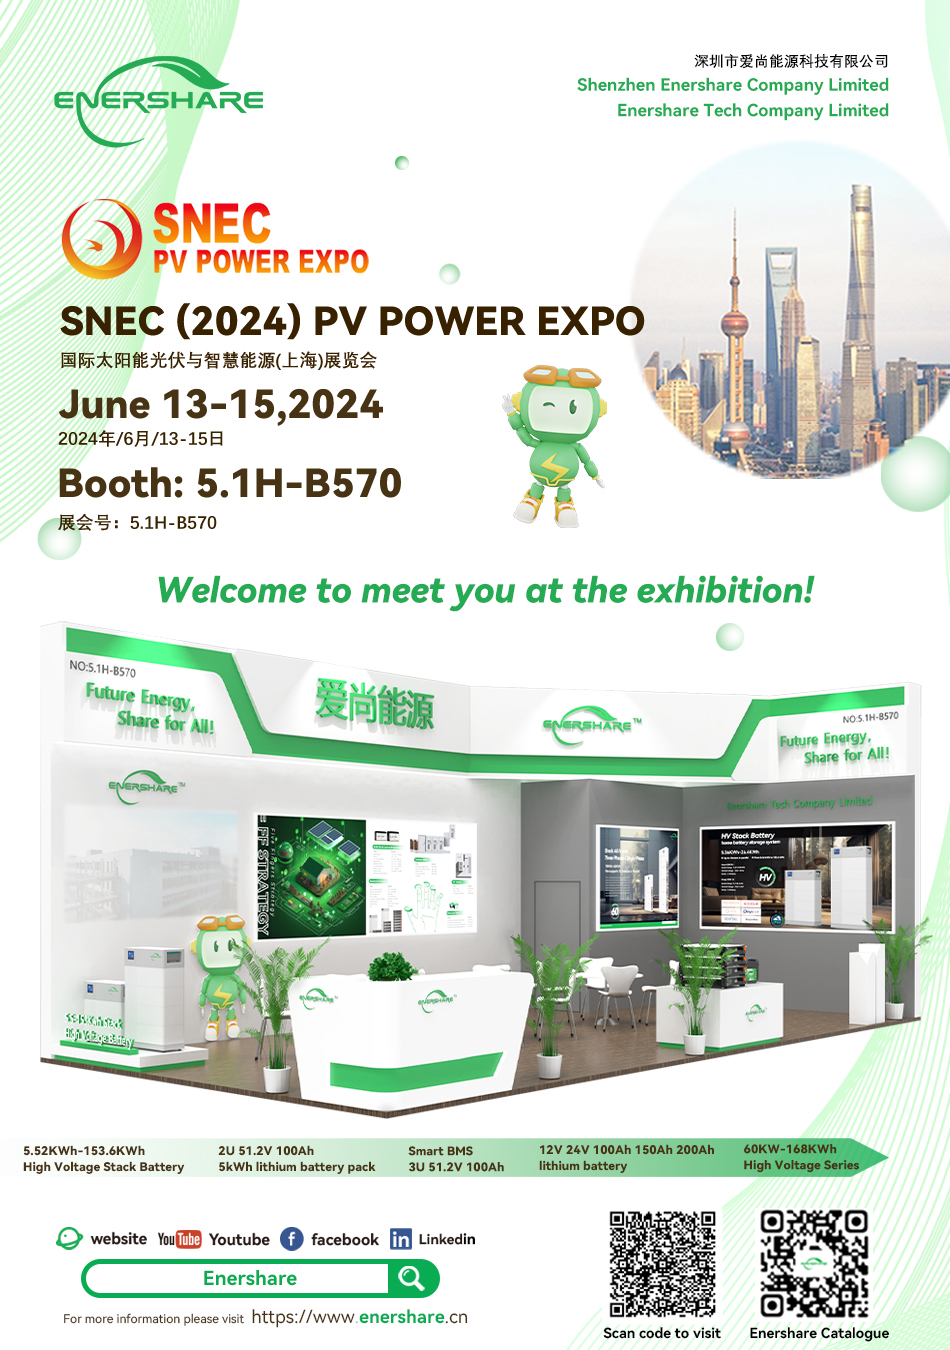 Enershare Energy will at the SNEC 2024 in Shanghai! 